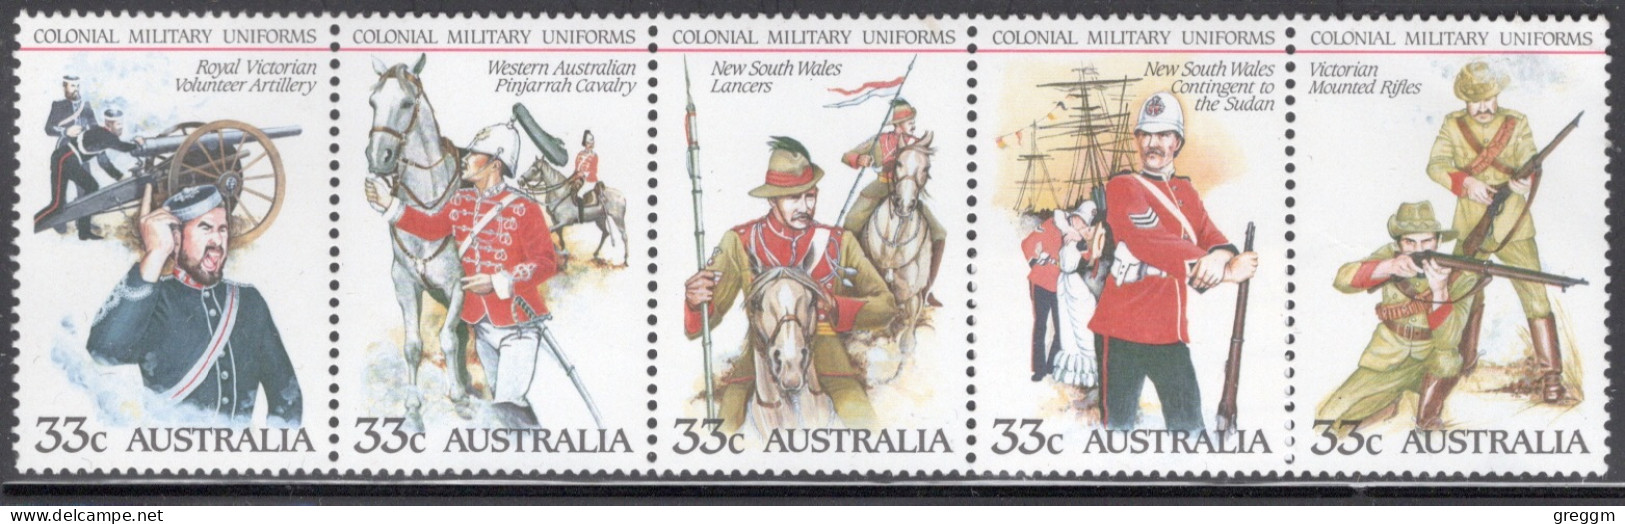 Australia 1985 Set Of Stamps To Celebrate Colonial Military Uniforms In Unmounted Mint - Mint Stamps